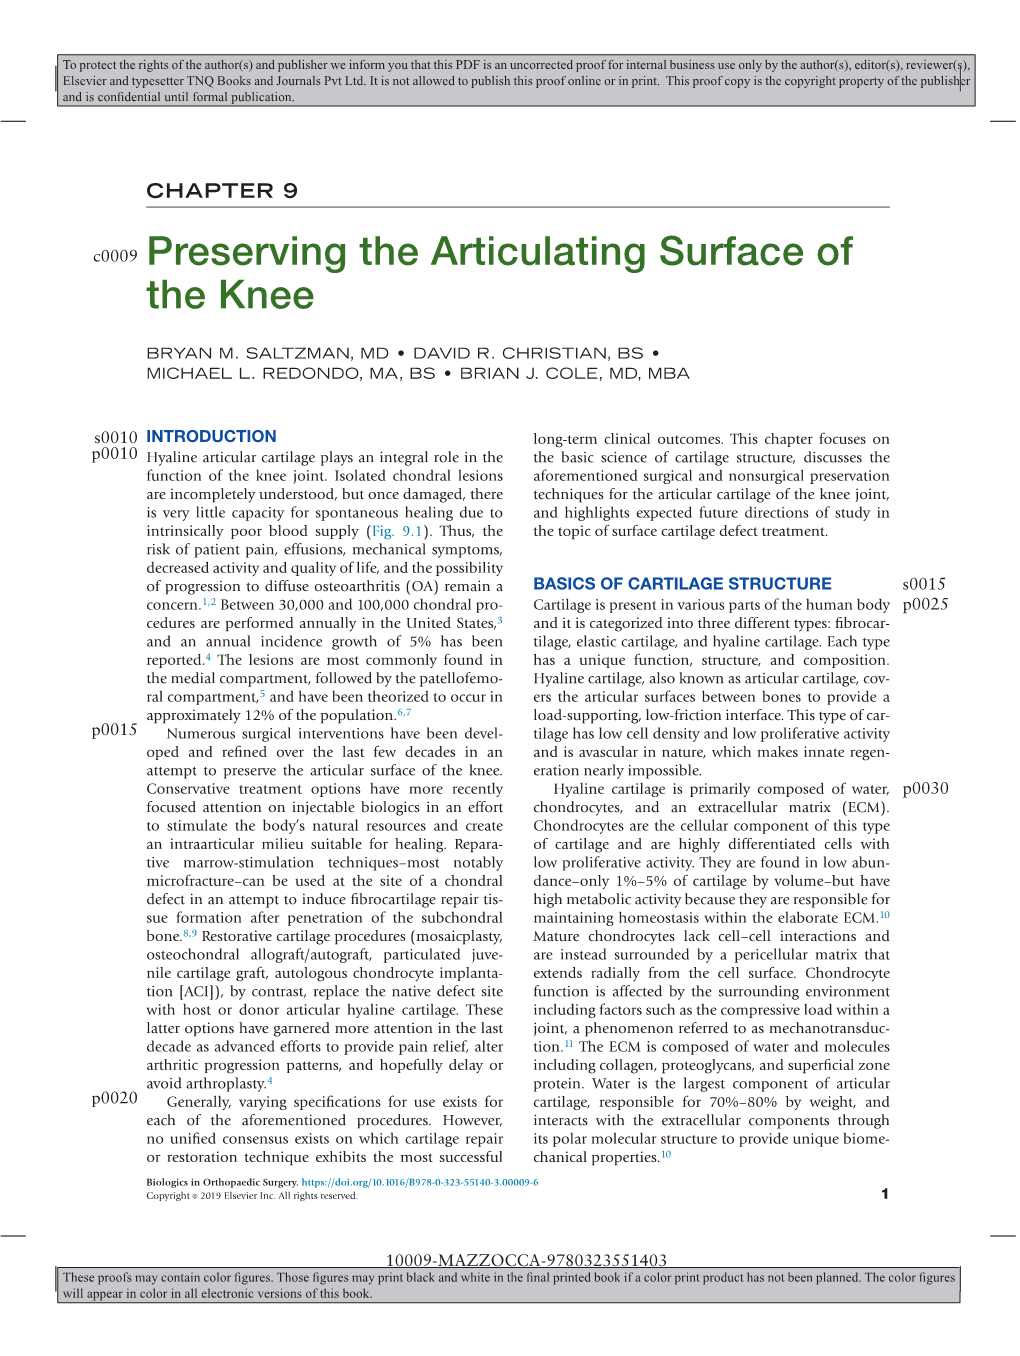 Preserving the Articulating Surface of the Knee